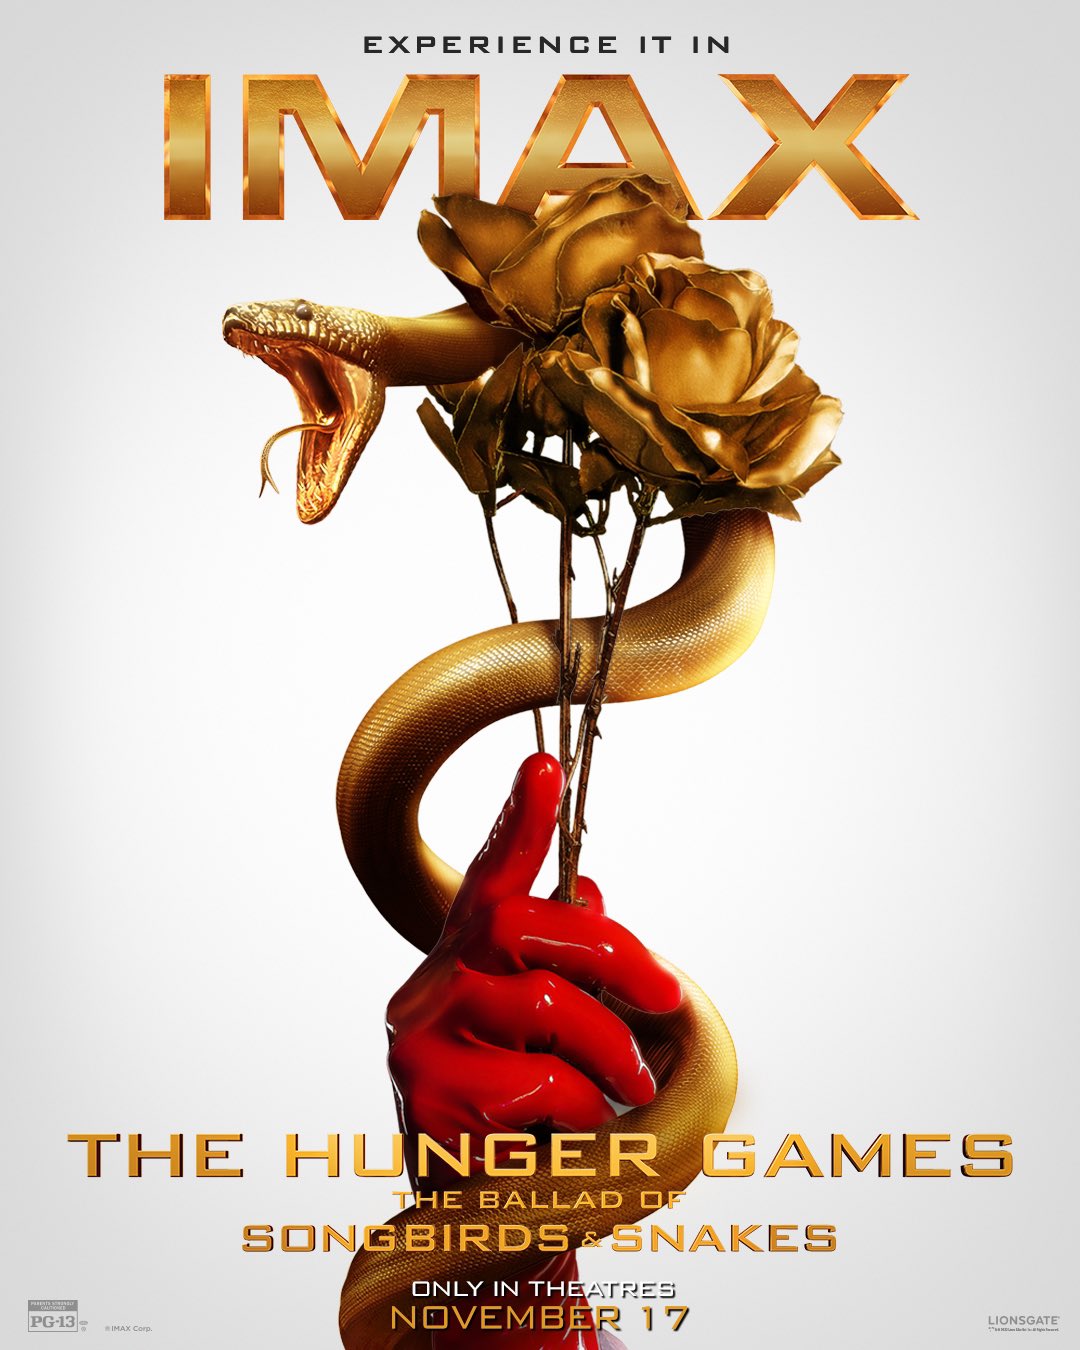 Hunger Games Ballad of Songbirds & Snakes IMAX poster